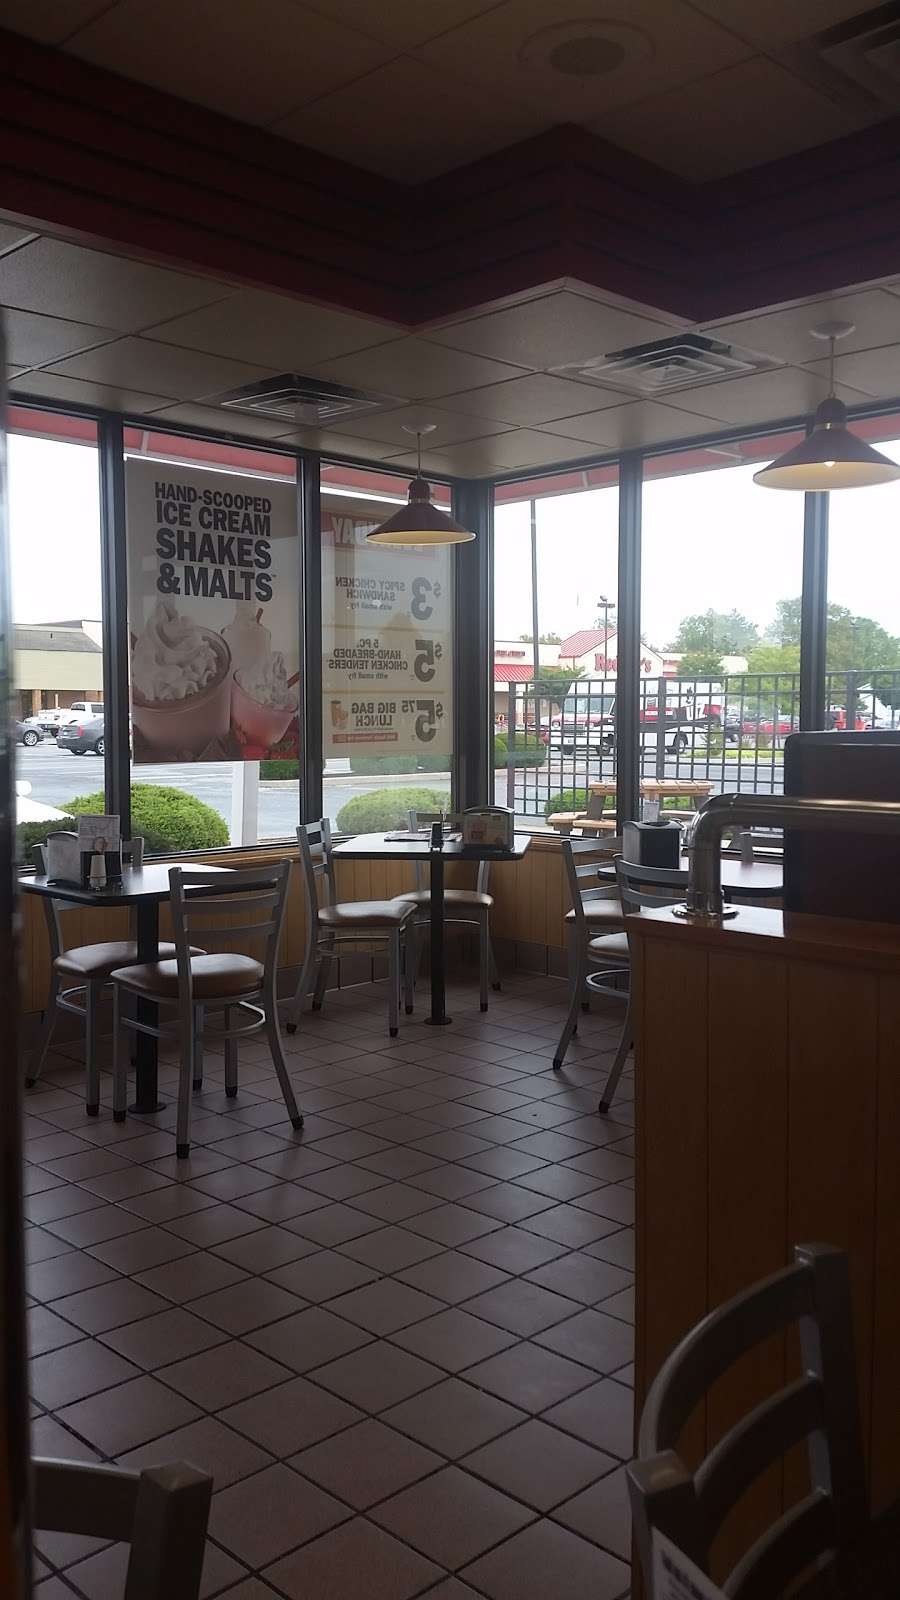 Hardees | 50 Greentree Dr, Dover, DE 19904 | Phone: (302) 674-8335